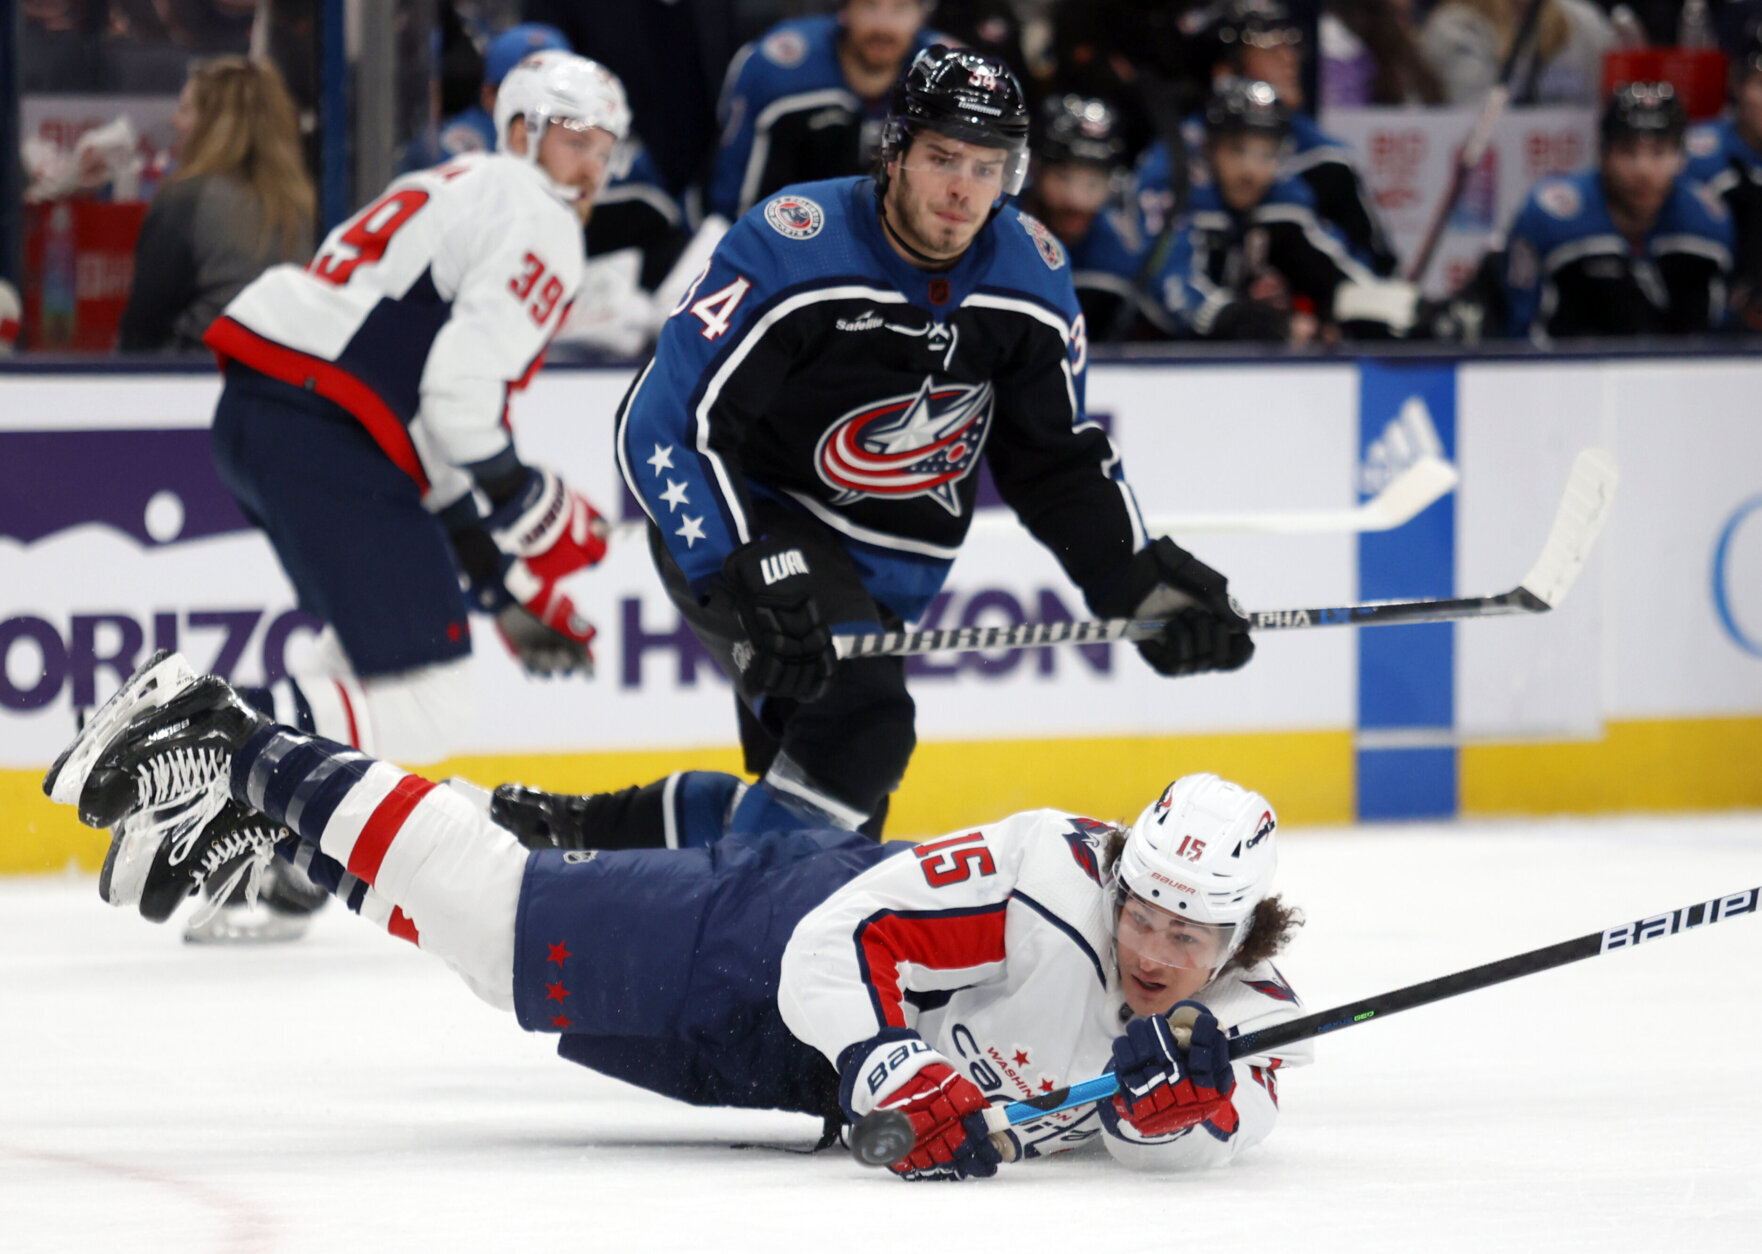 Point lifts Tampa Bay Lightning over Columbus Blue Jackets in OT